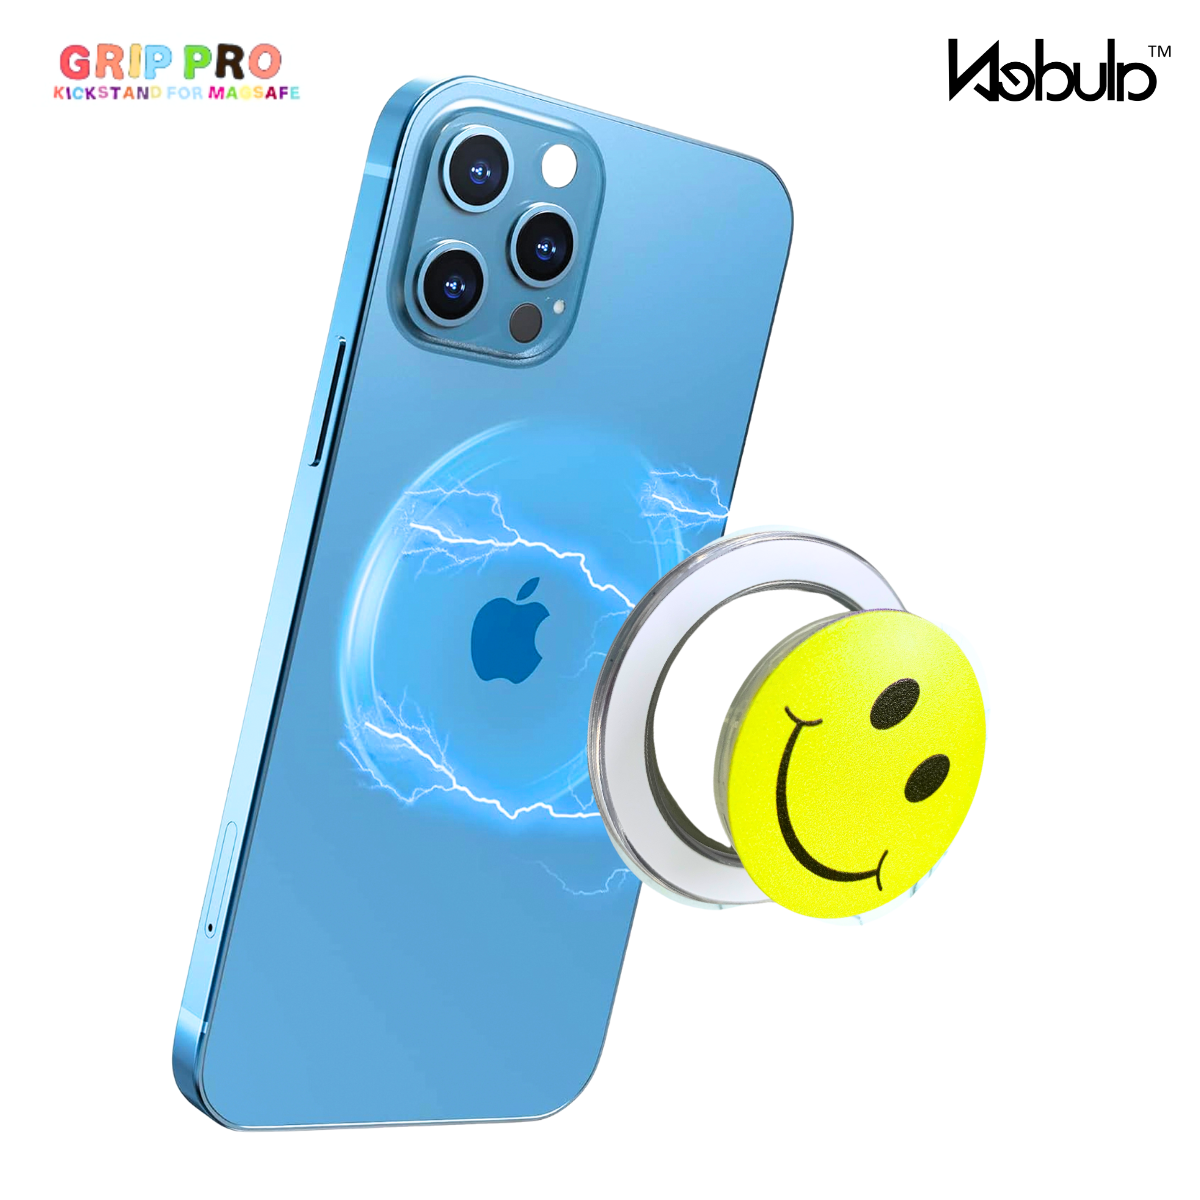 Nebula GripPro Magnetic Phone Grip Smiley Face